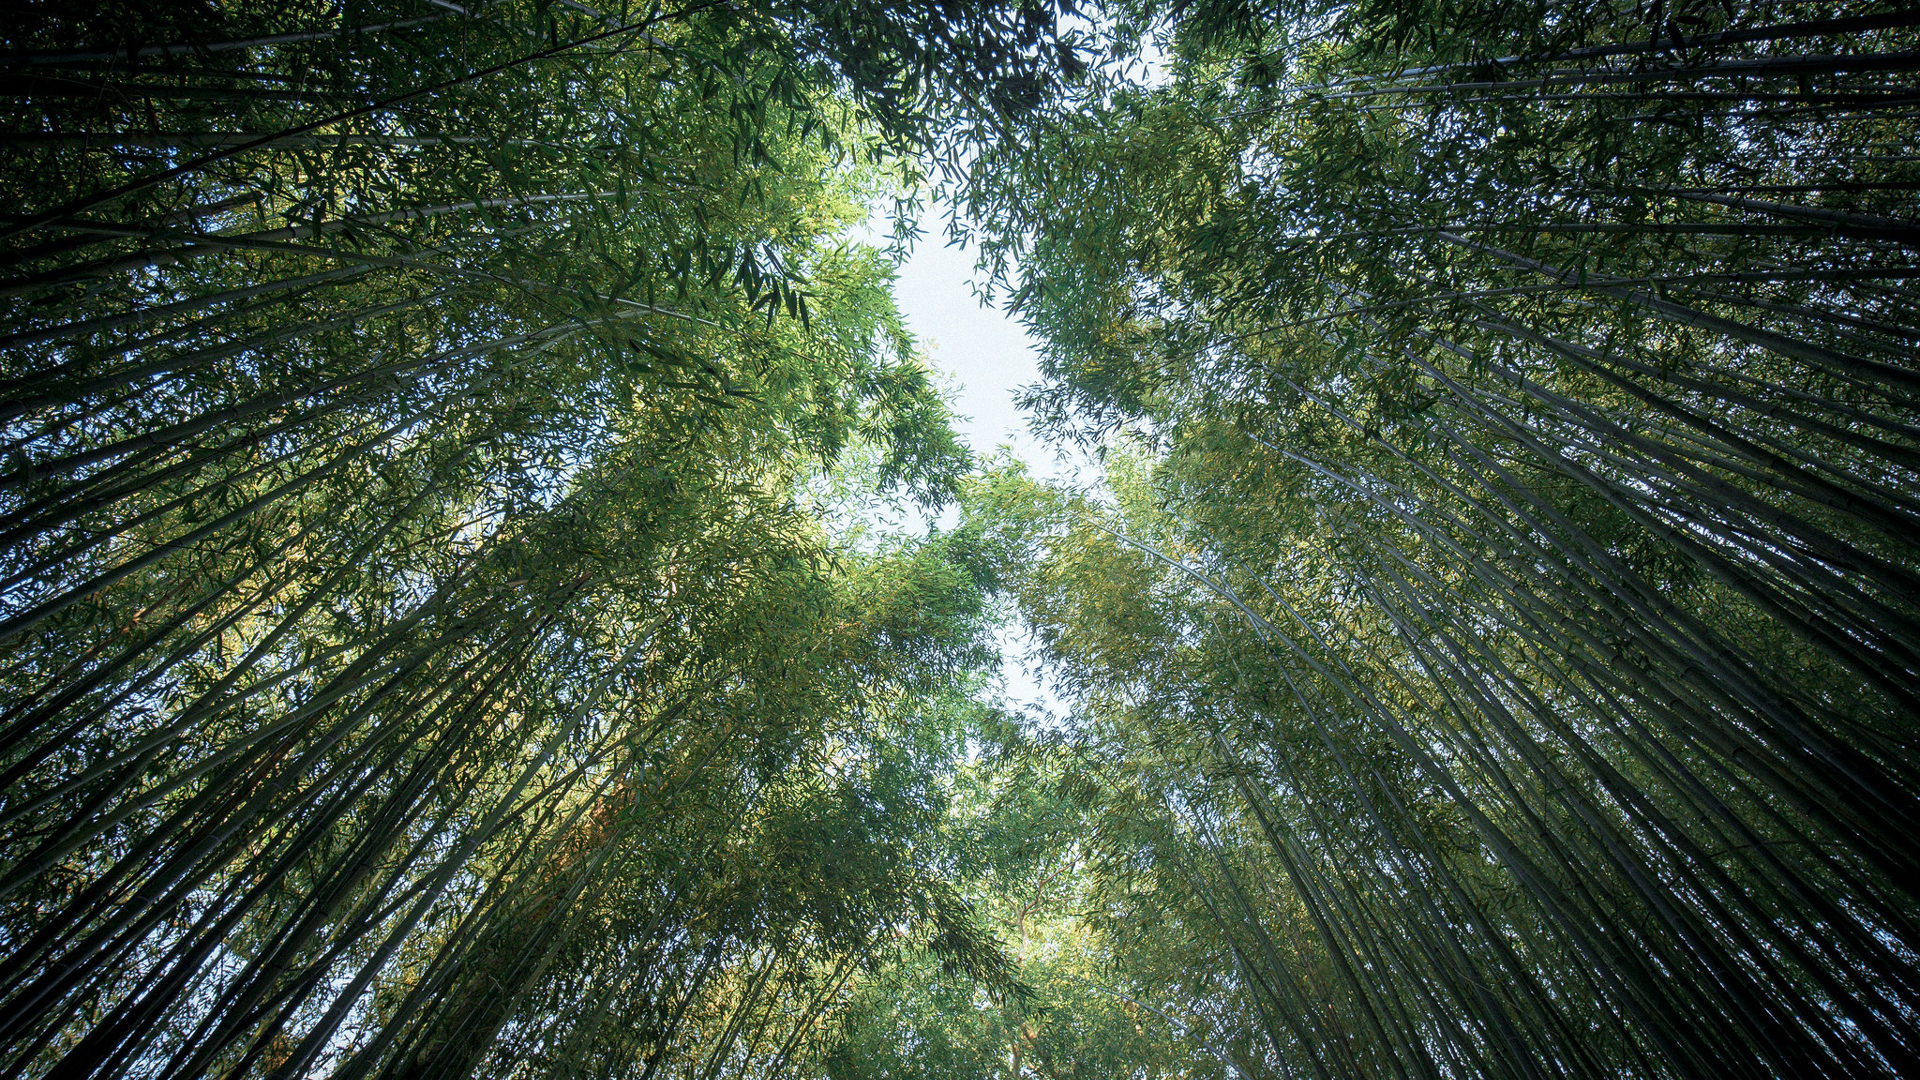 Worm’s Eye View Of Bamboo Trees Forest Under Blue Sky 2K Bamboo